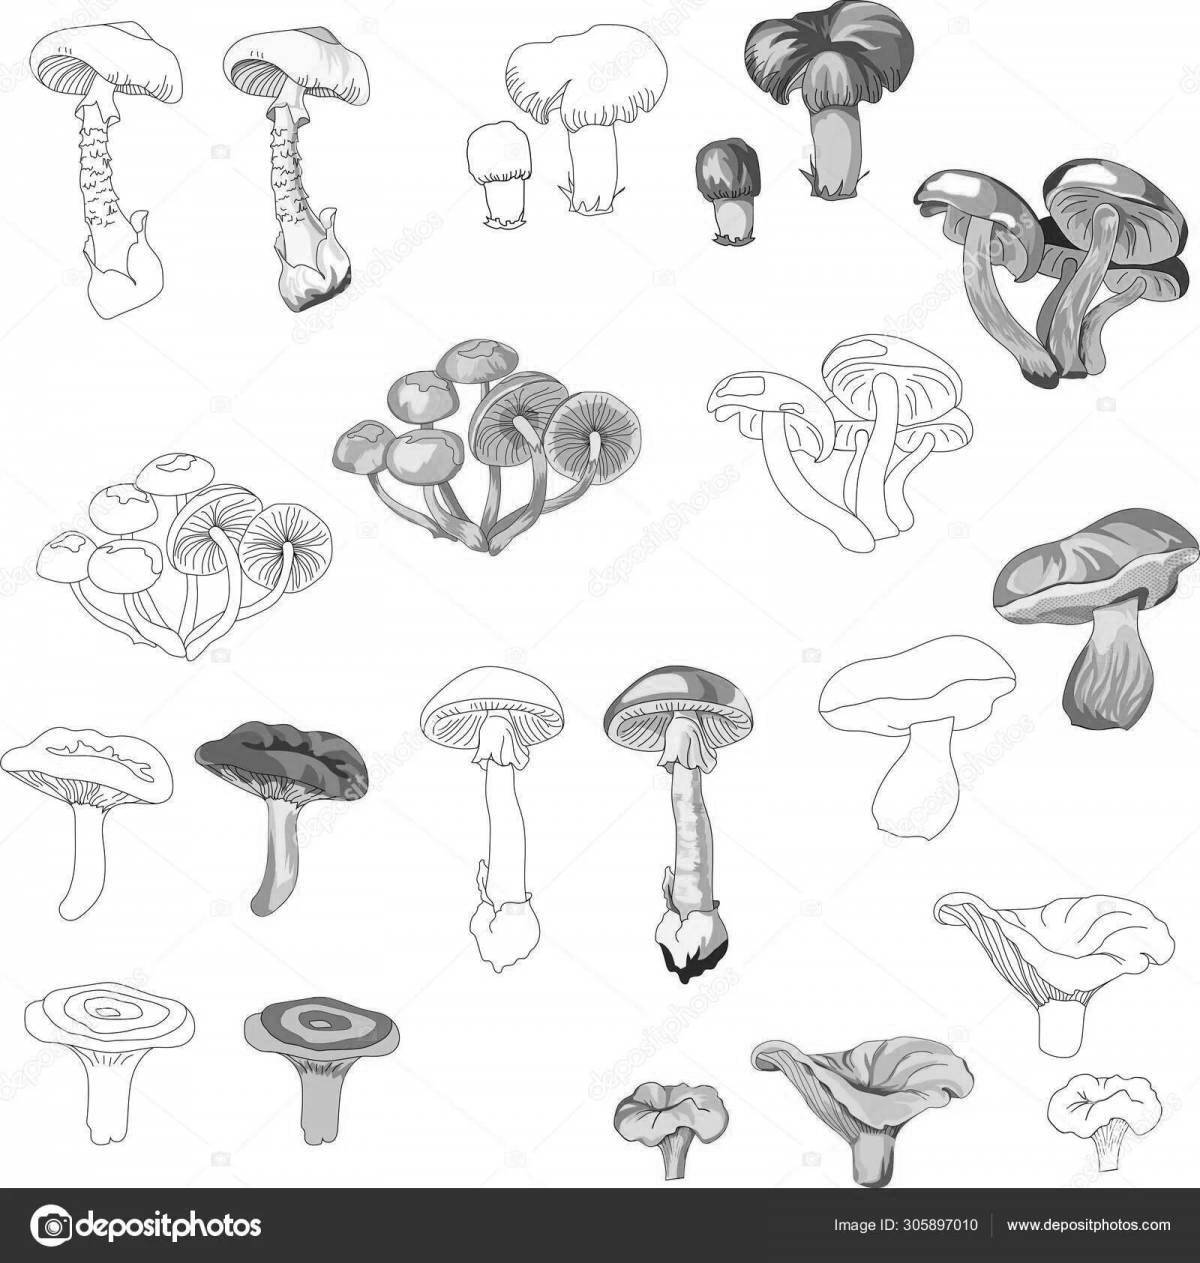 Intriguing coloring of poisonous mushrooms